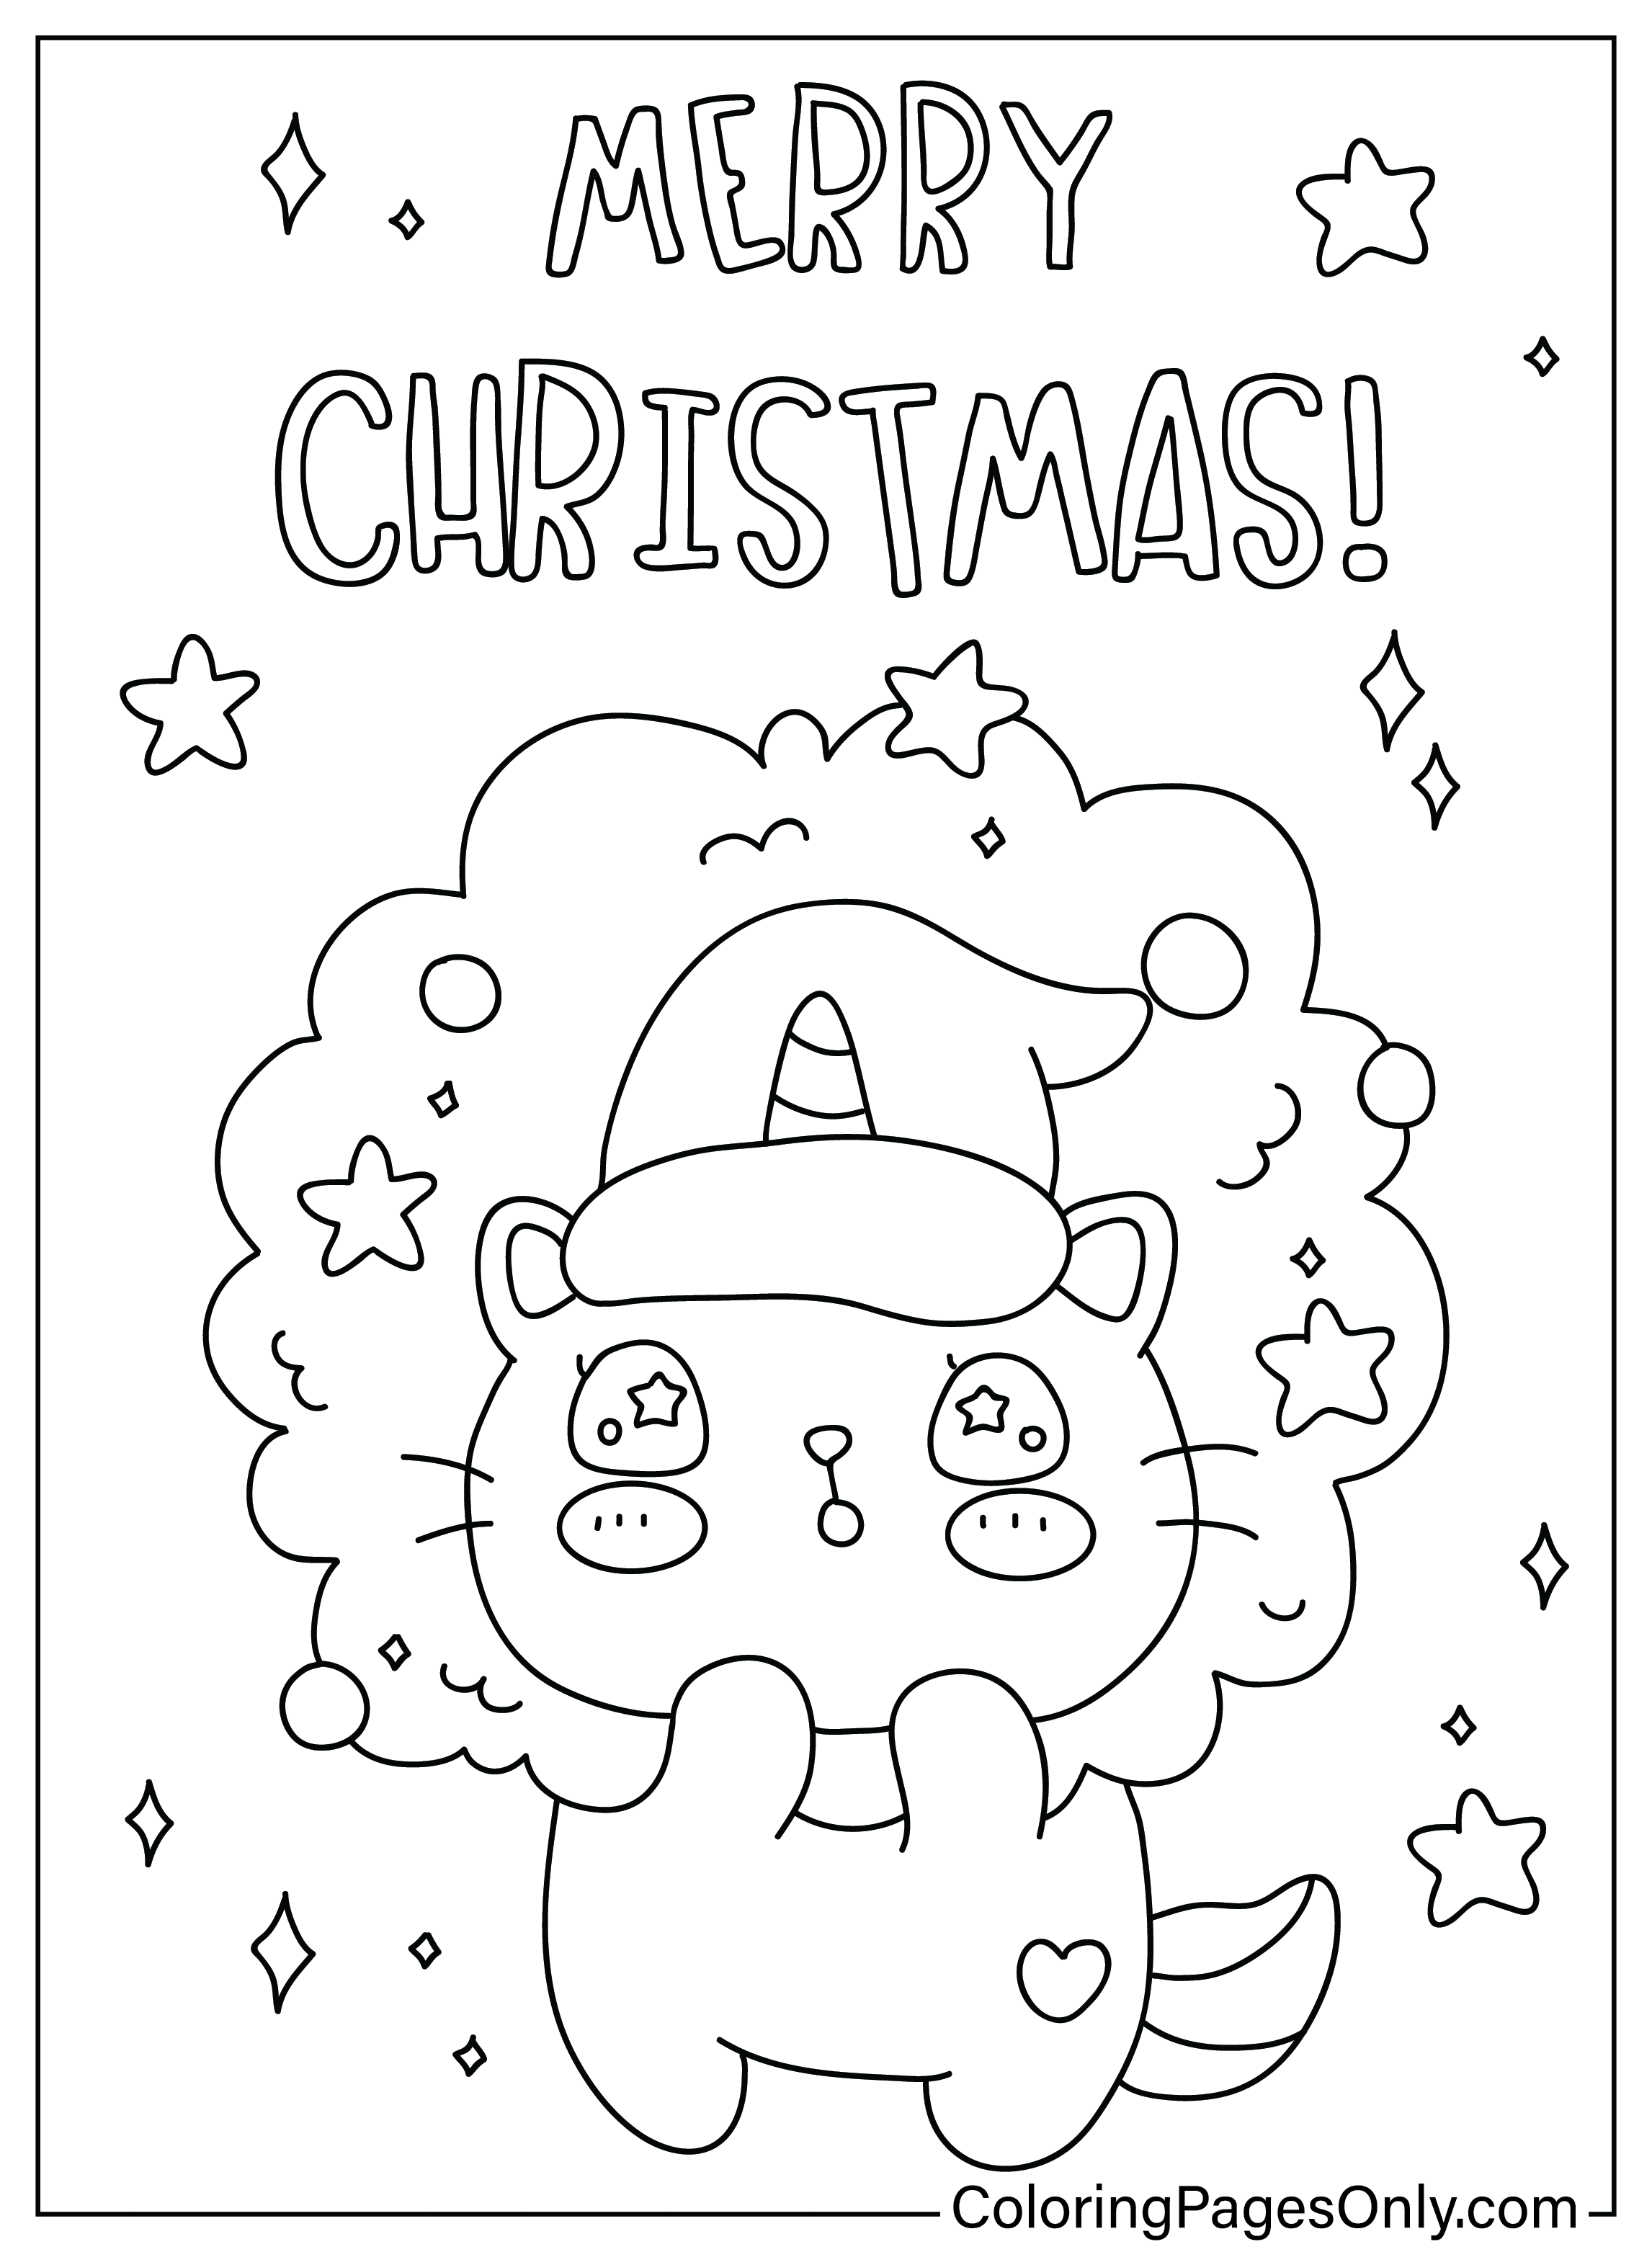 Cute Christmas Coloring Page Pictures